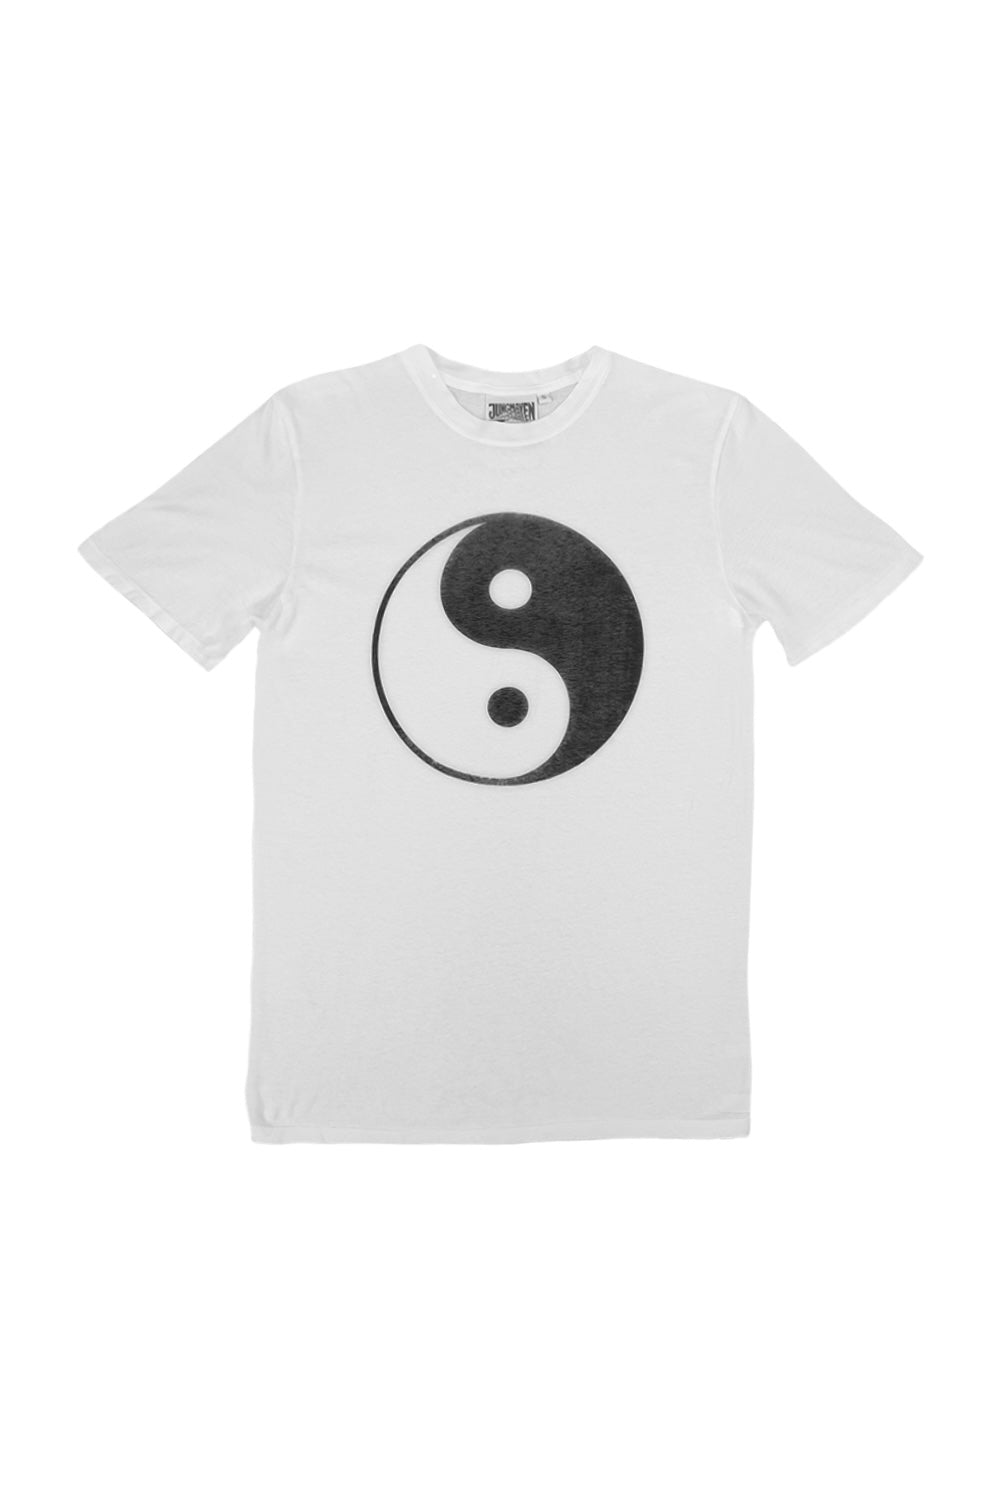 Yin Yang Basic Tee | Jungmaven Hemp Clothing & Accessories / Color: Washed White